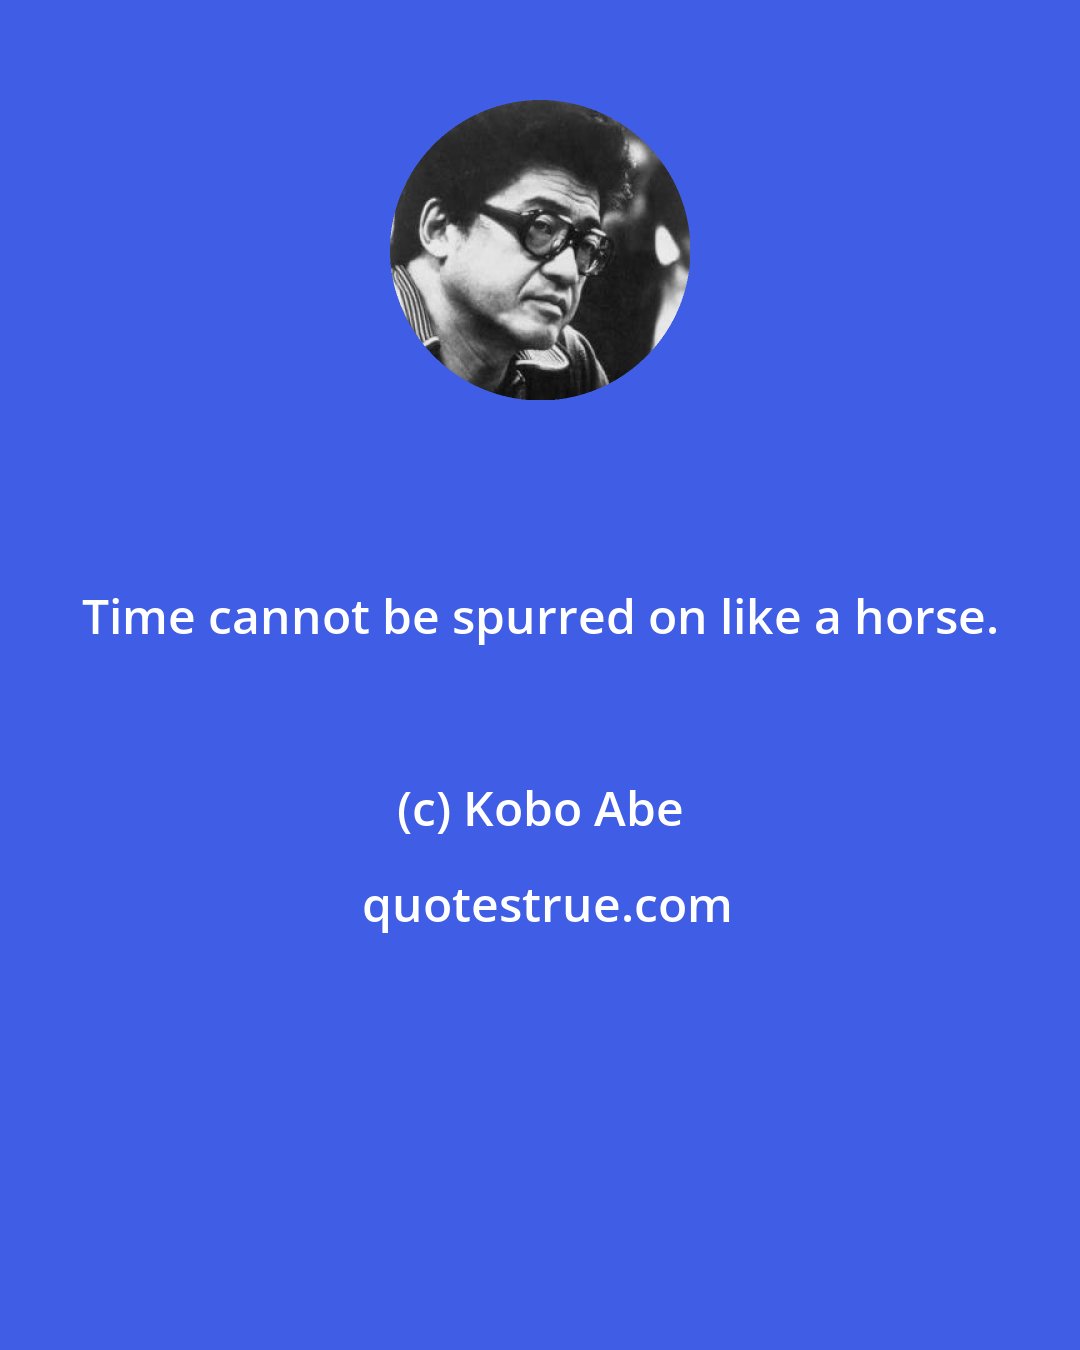 Kobo Abe: Time cannot be spurred on like a horse.